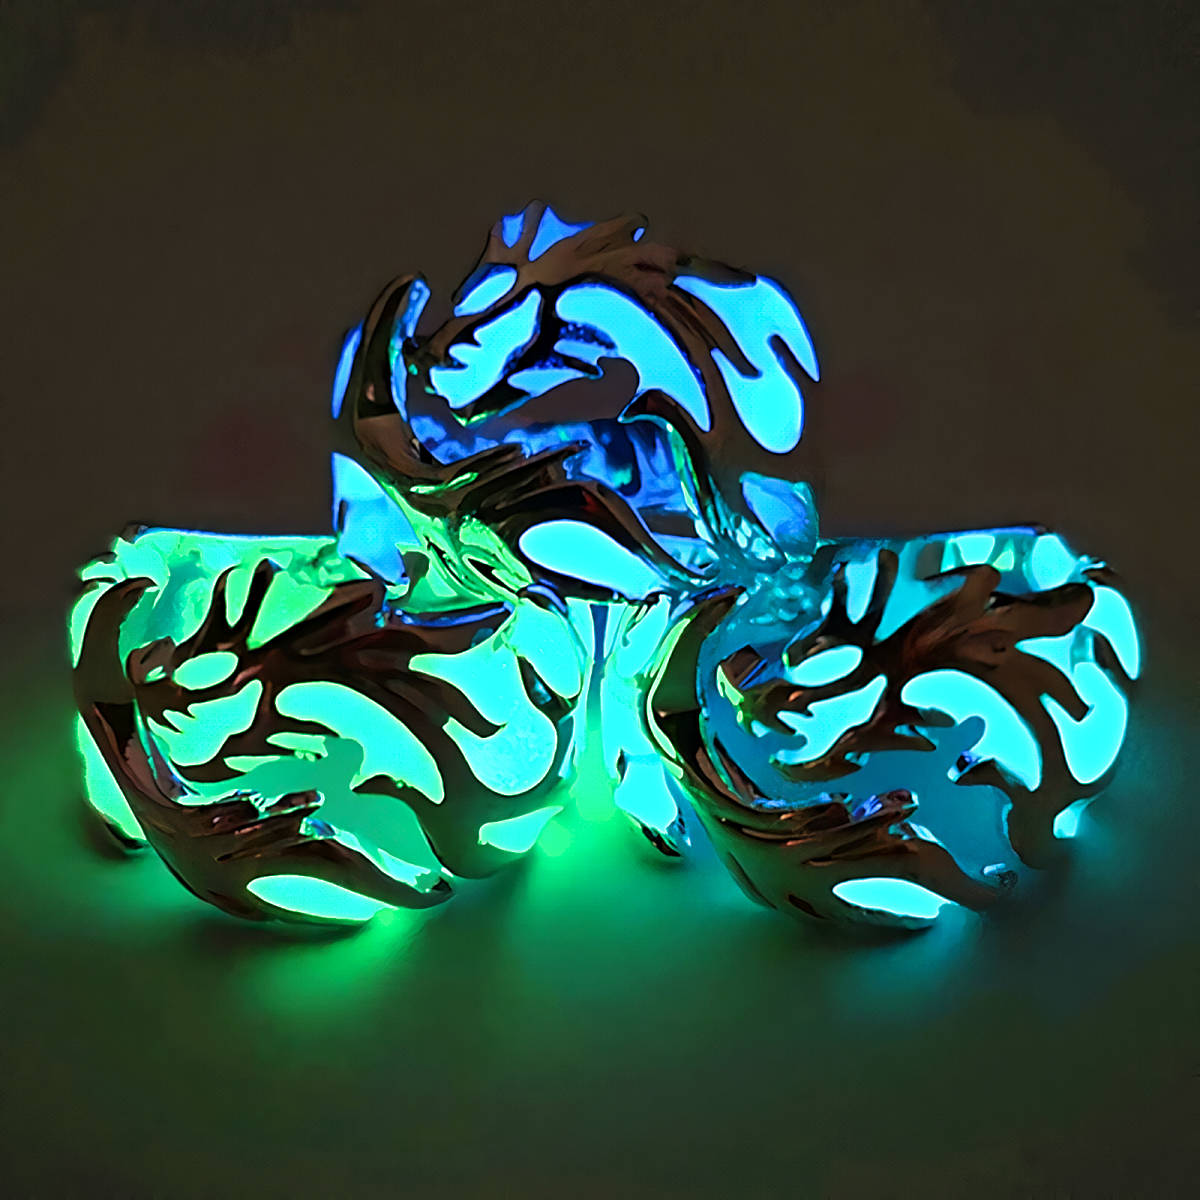  new goods 1 jpy ~* free shipping * dark luminescence 2 color blue green .. Dragon free size K18GF Gold ring birthday present travel consecutive holidays flower see New Year (Spring) the first summer gift domestic sending 